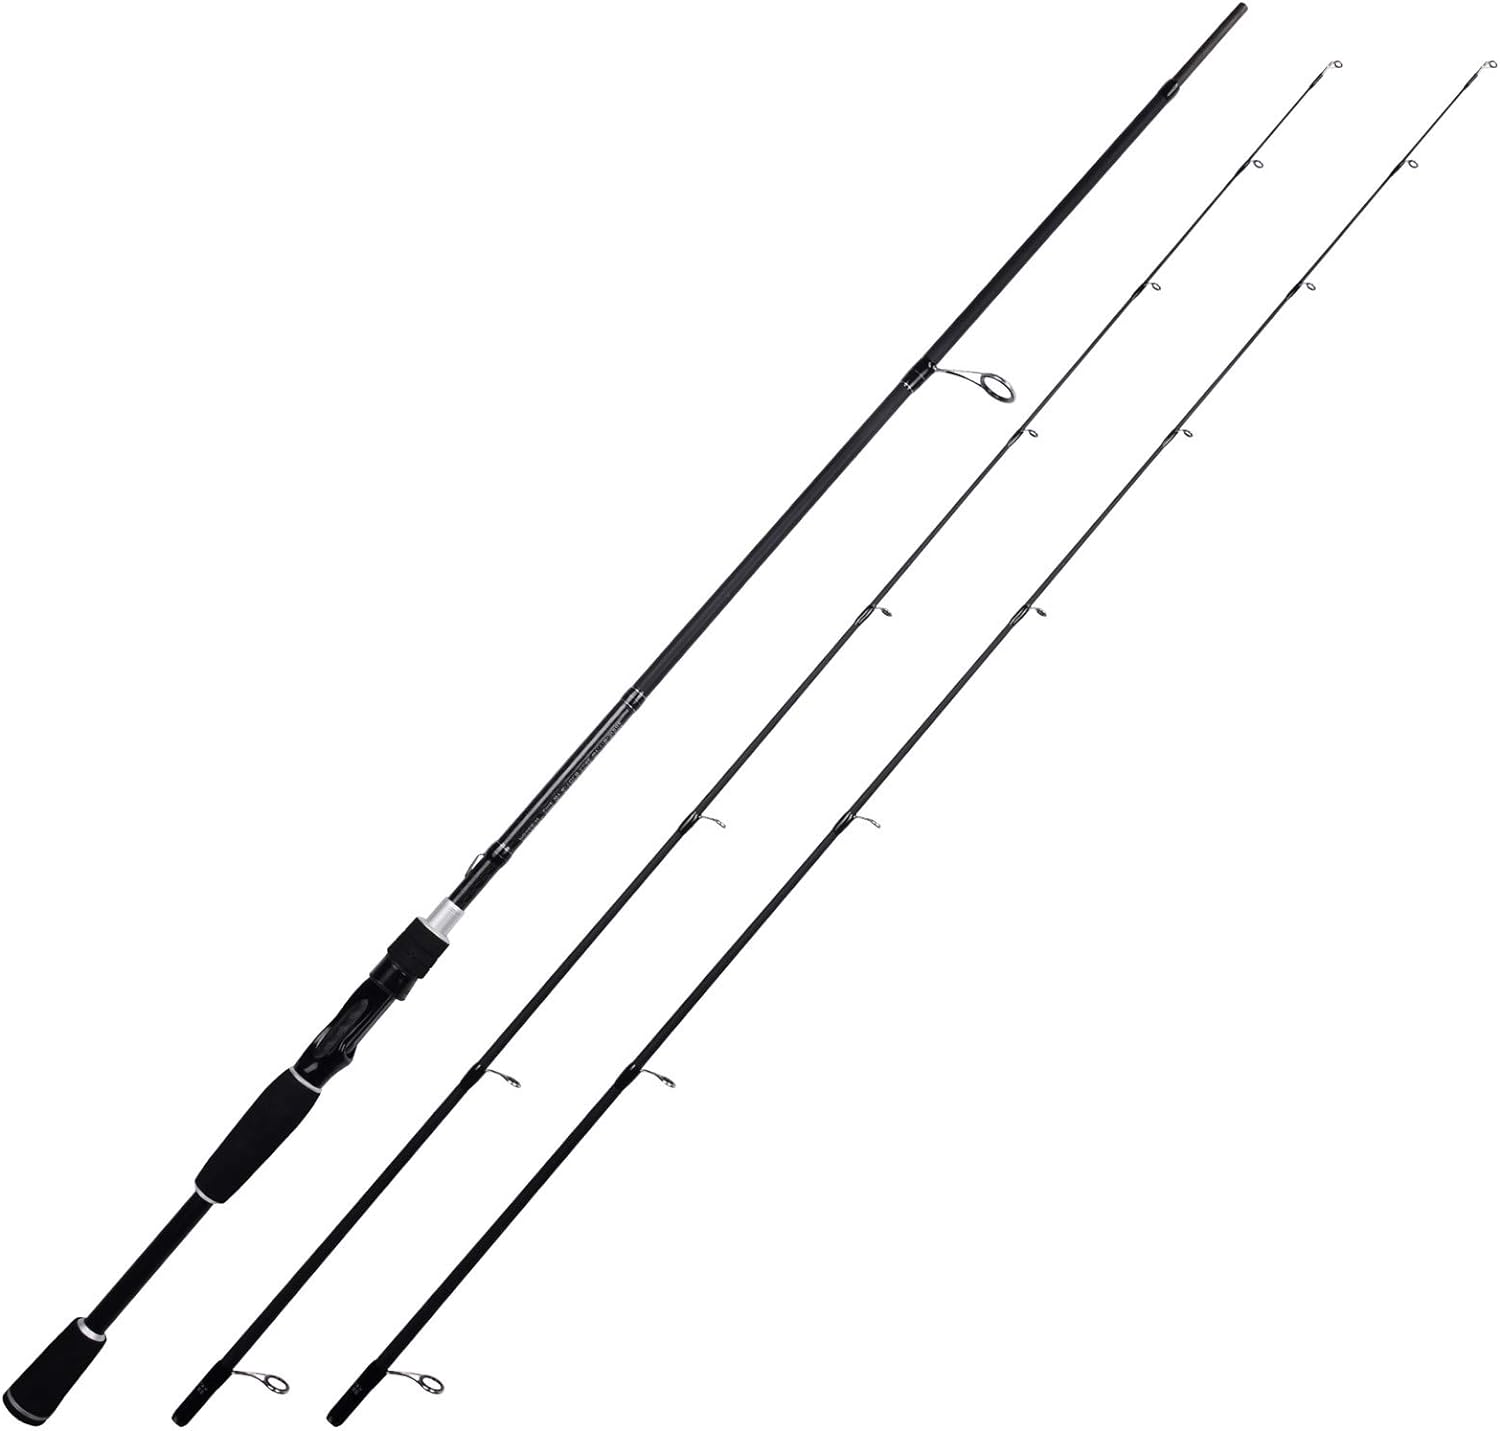 KastKing Perigee II Spinning & Casting Fishing Rods, Fuji O-Ring Line Guides, 24 Ton Carbon Fiber Casting and Spinning Rods - Two Pieces,Twin-Tip Rods and One Piece Rods